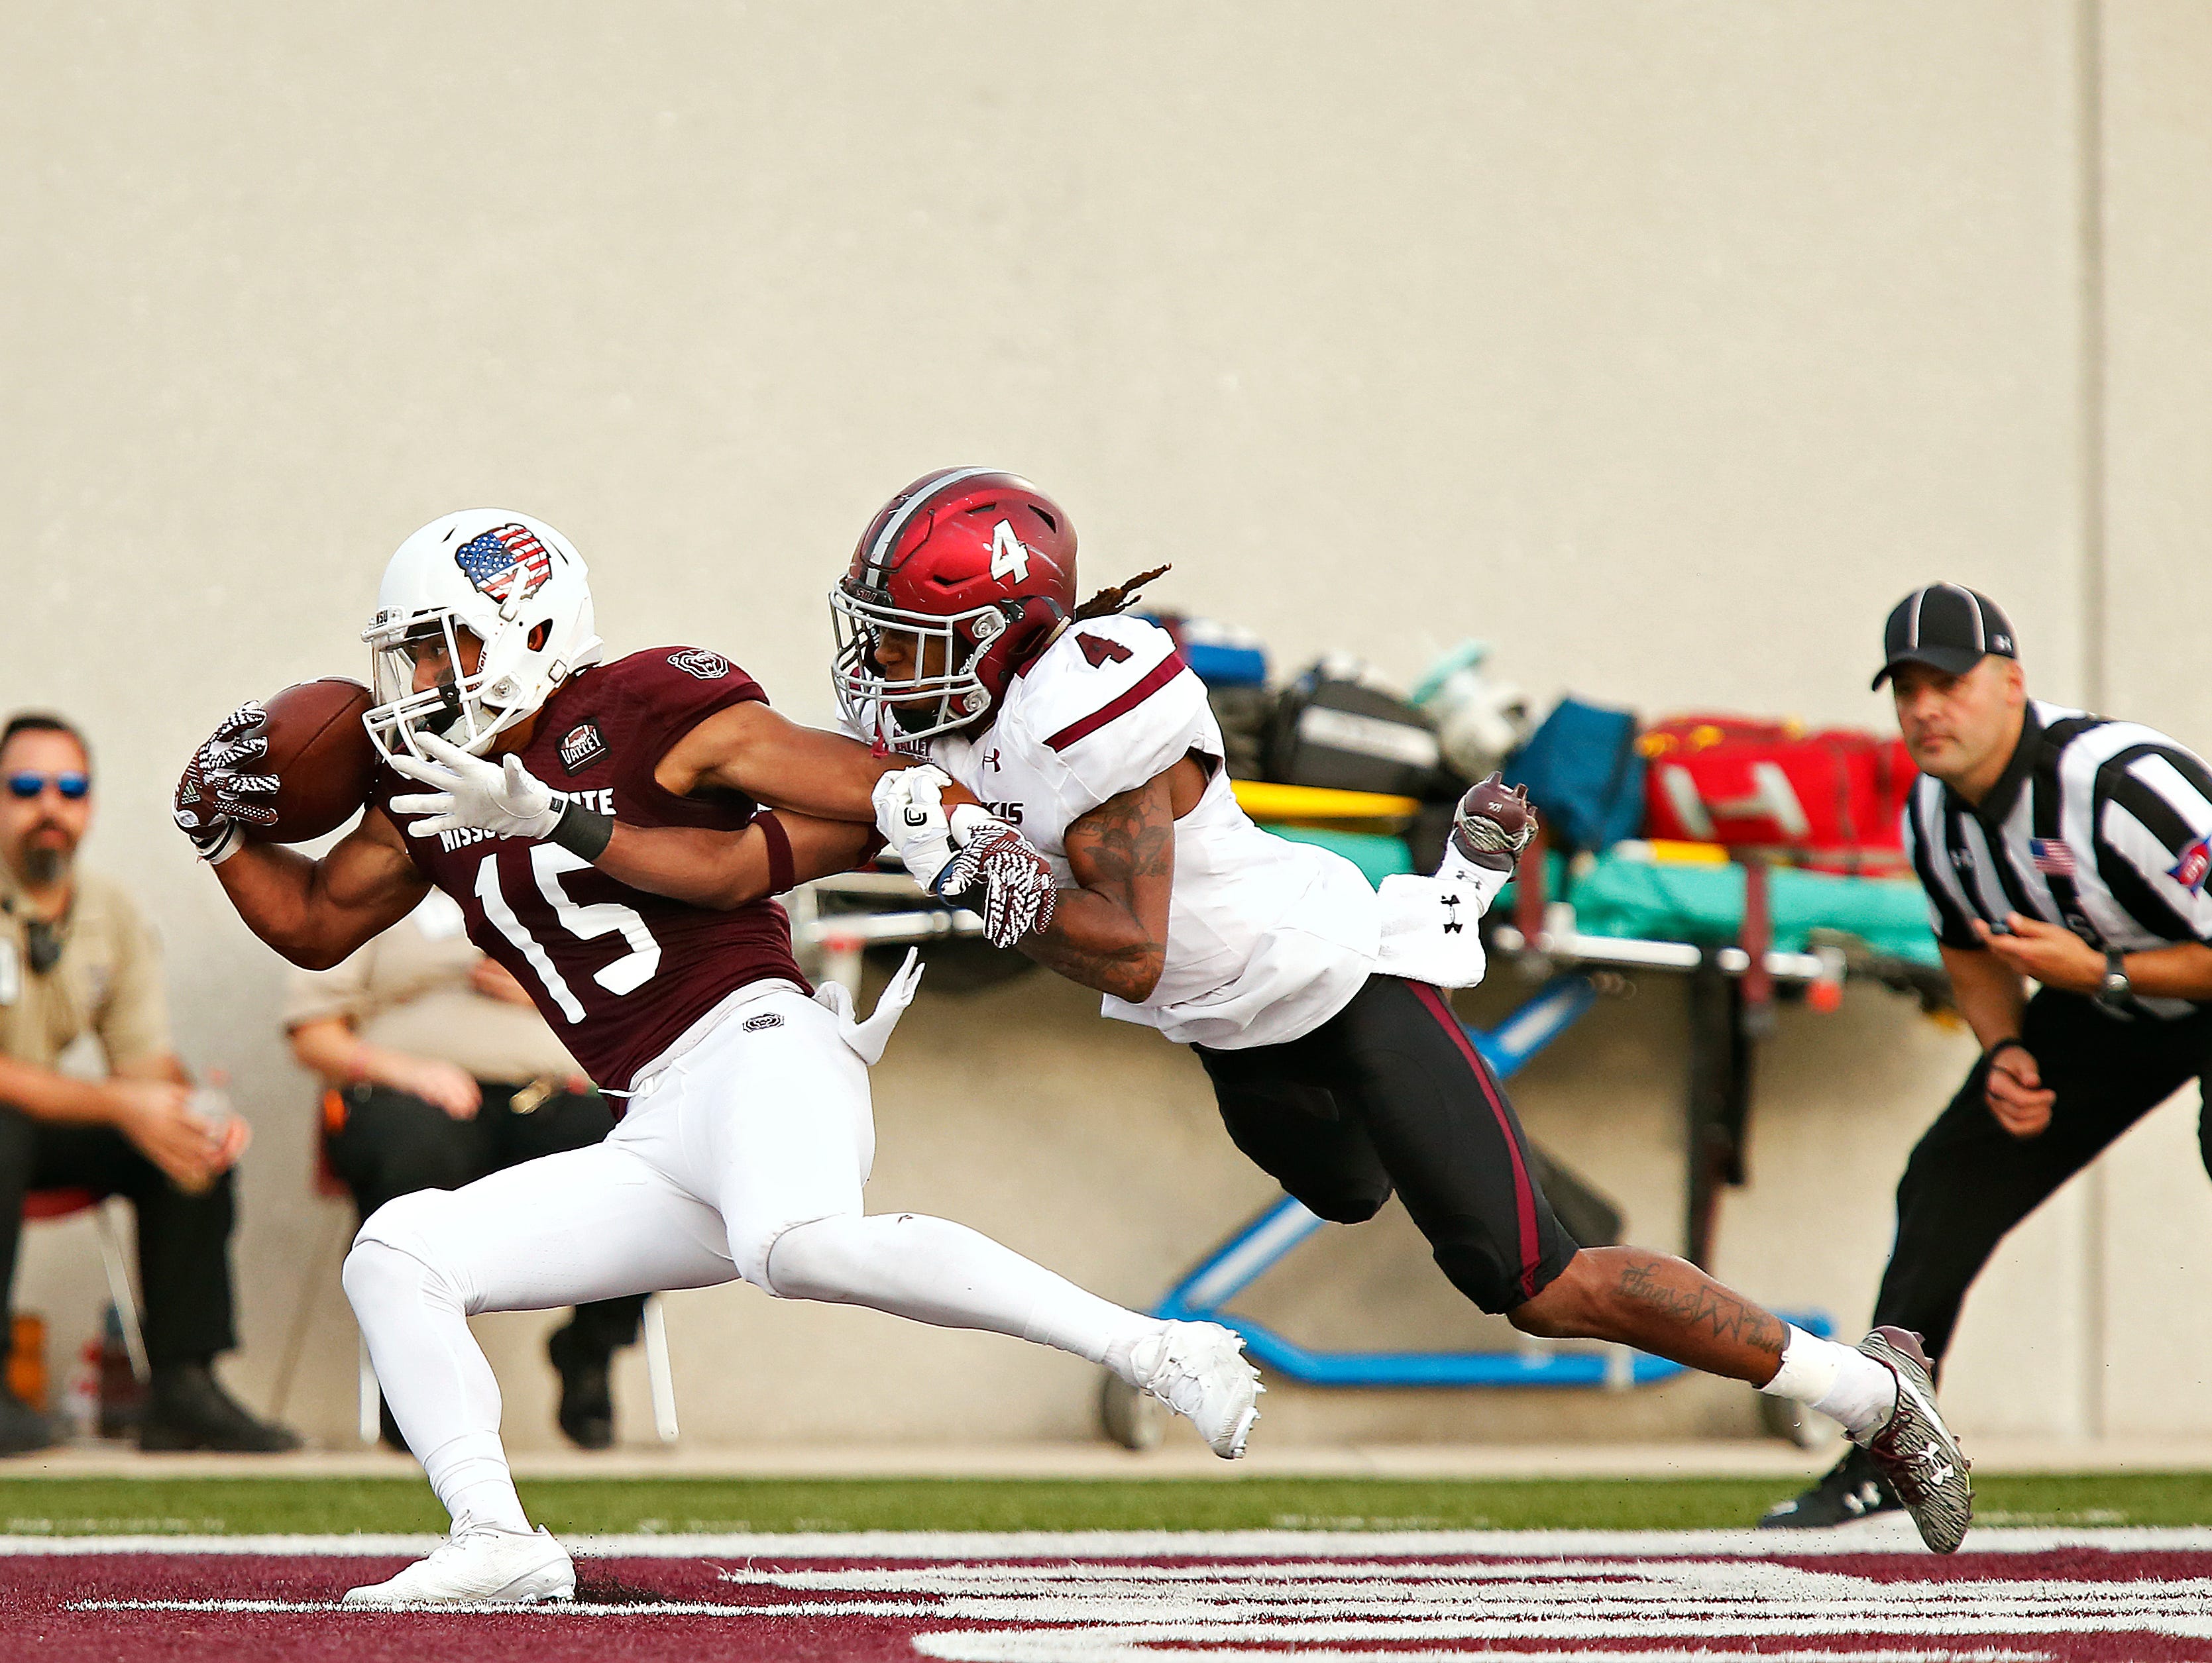 Zac Hoover's one-handed touchdown catch in Missouri State's victory over Southern Illinois is one of the lasting highlights from the 2016 season.